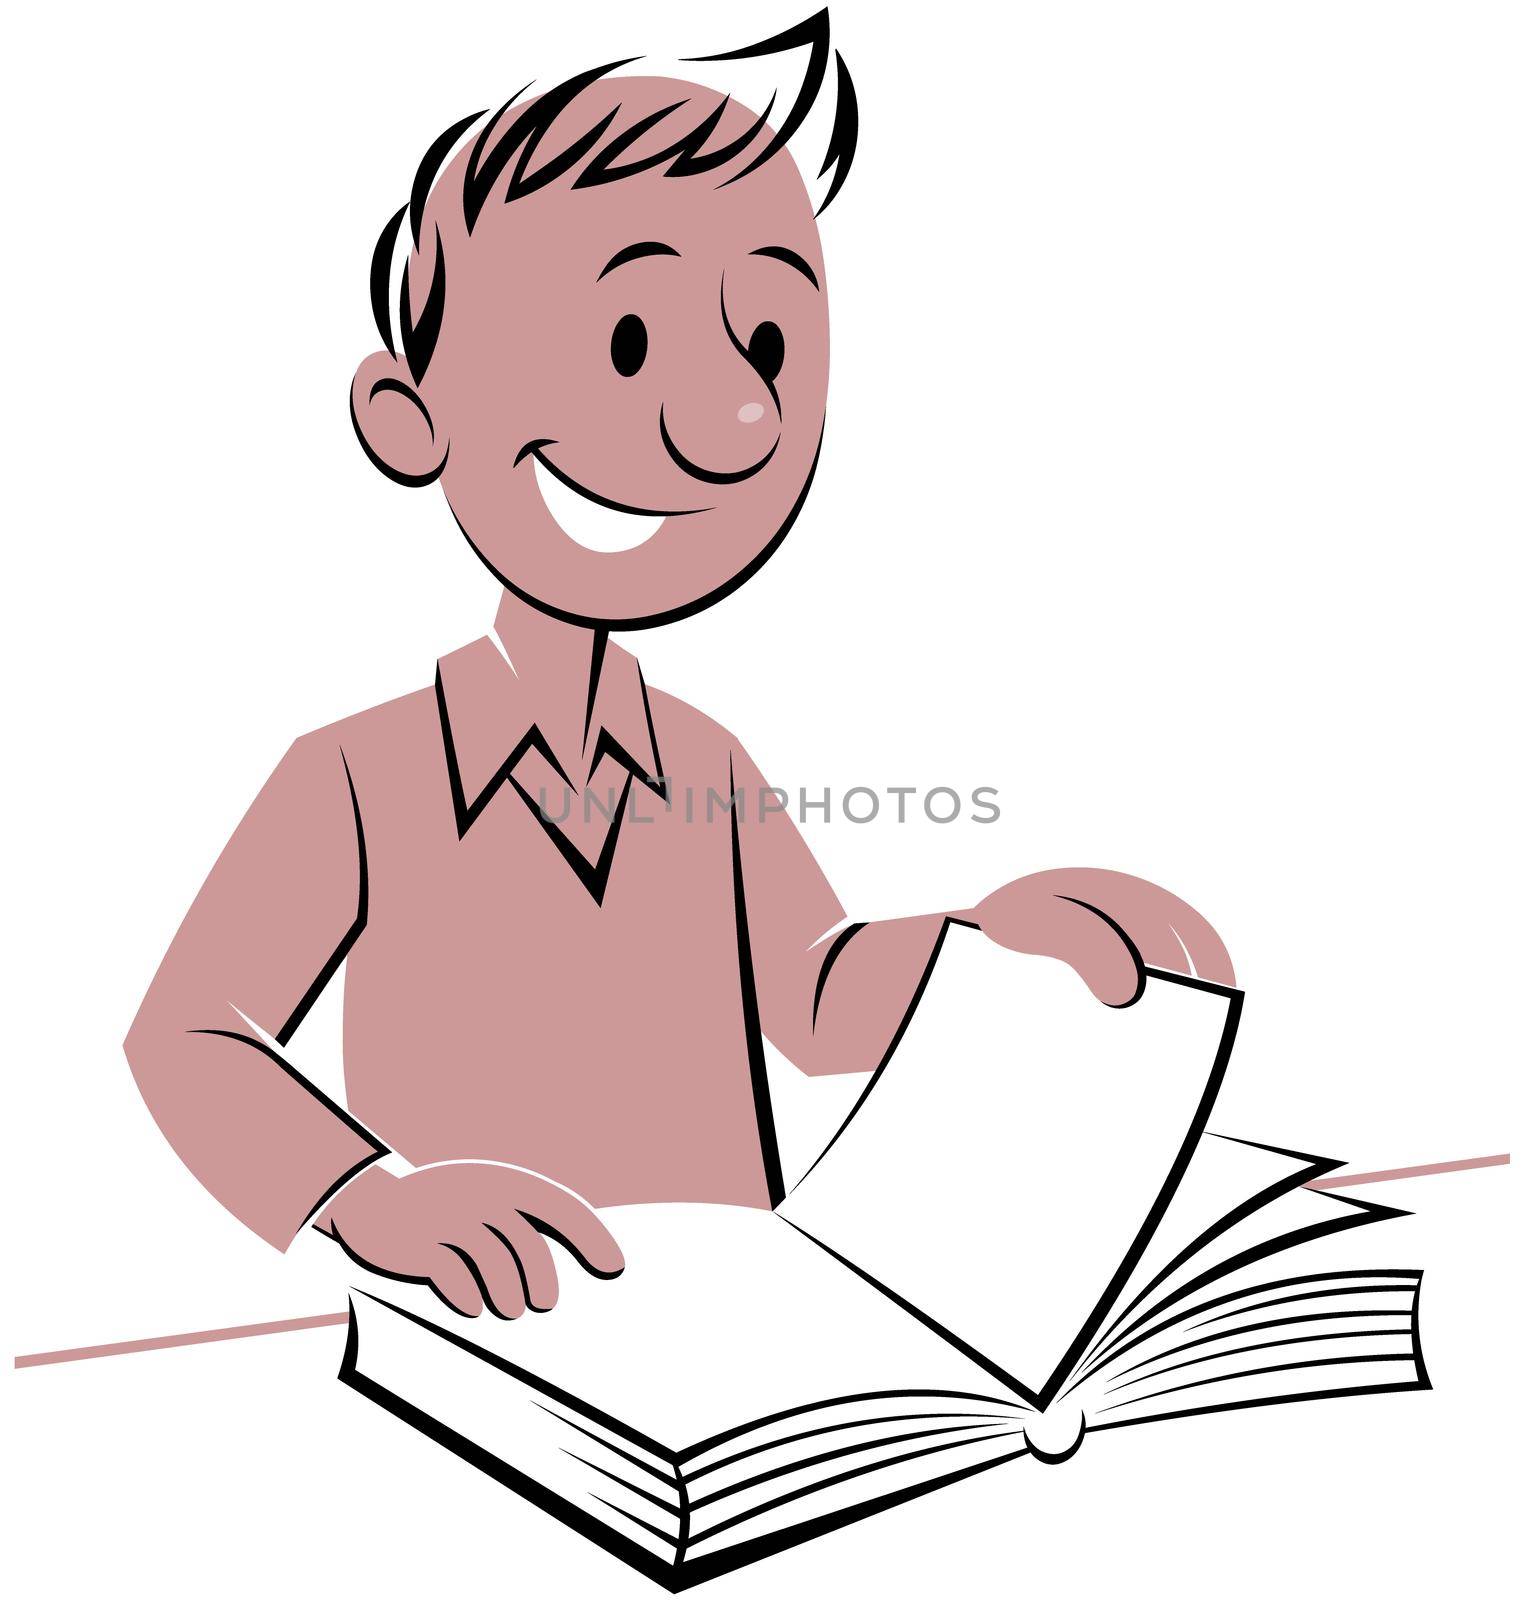 Color vector illustration of smiling man reading a book  isolated on white background.